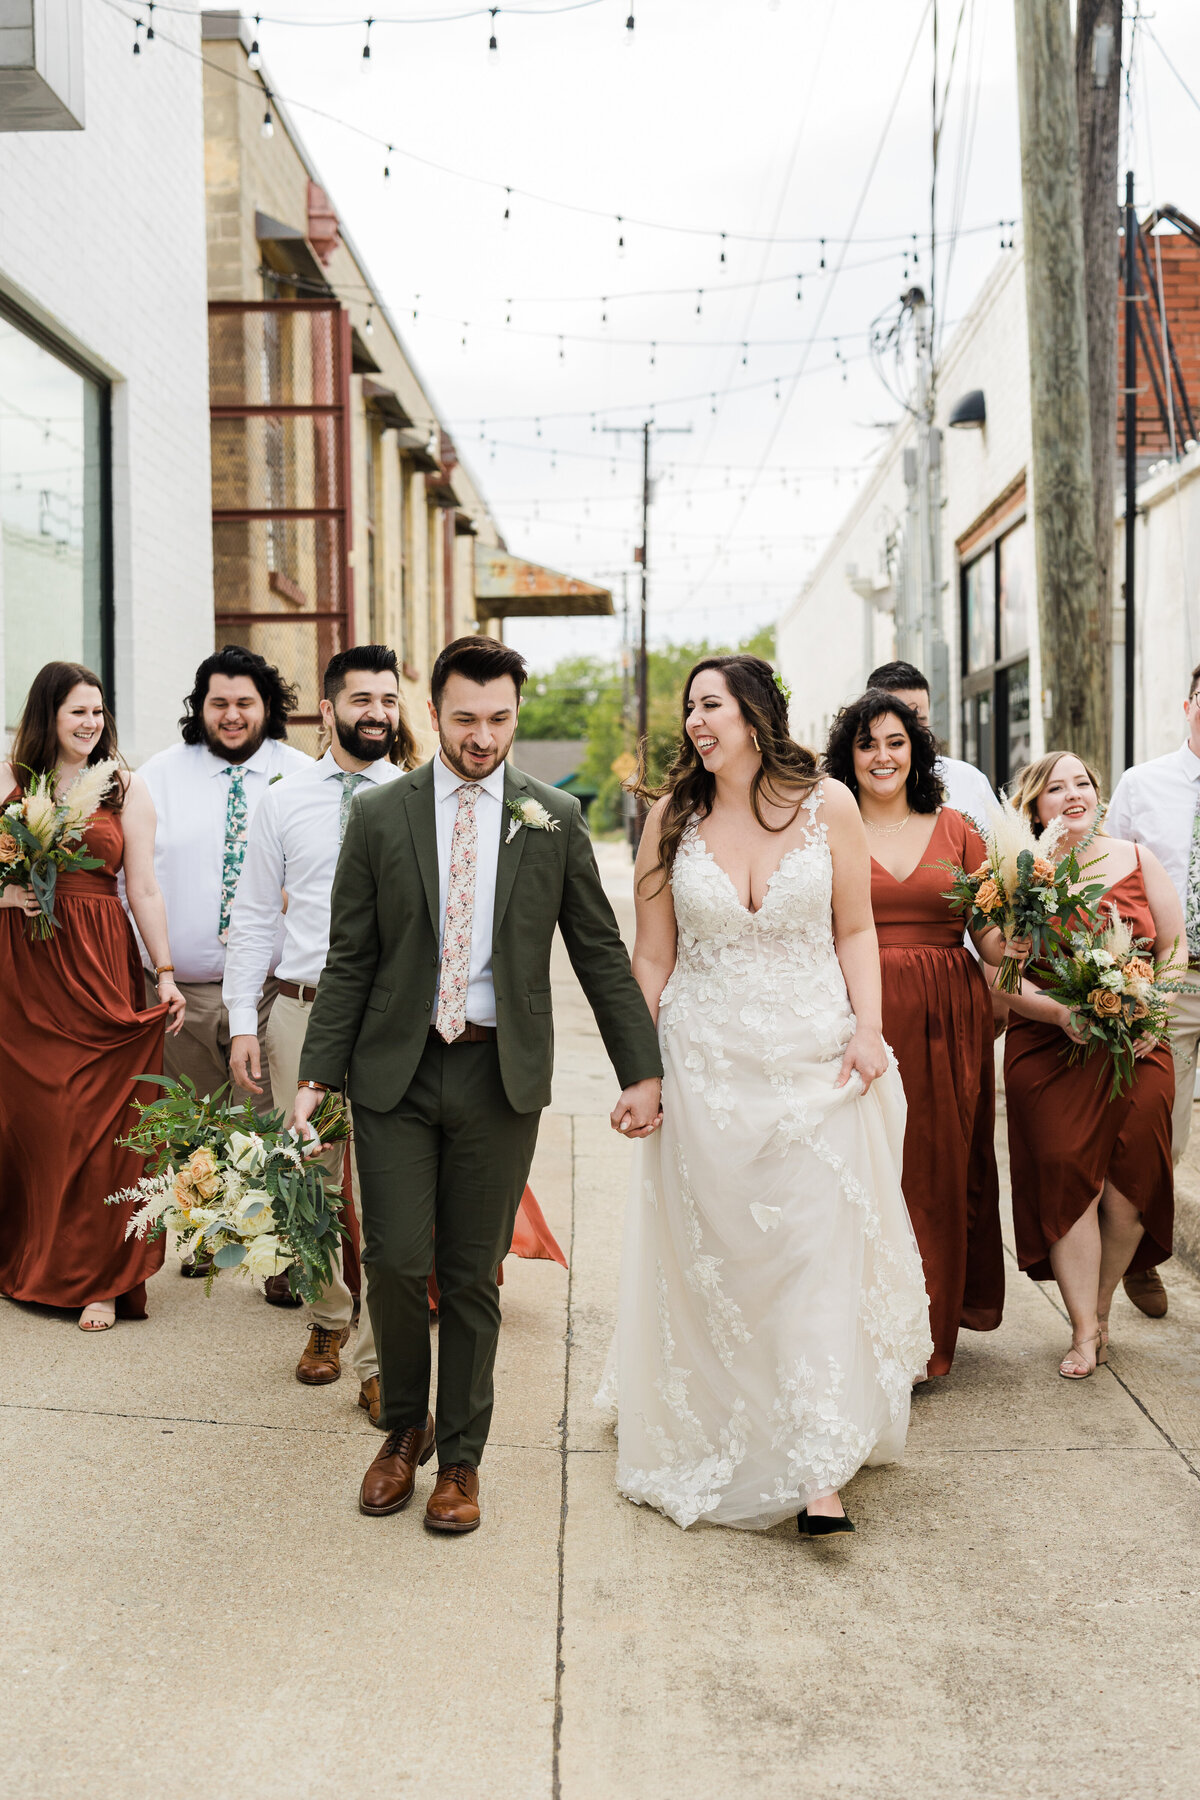 A walking shot of a bride, groom, and their whole wedding party after their wedding ceremony at The 4 Eleven in Fort Worth, Texas. The bride is on the right and is wearing a long, intricate, white dress with a hairpiece. The groom is on the left and is wearing a dadrk green suit with a floral tie and boutonniere. Their wedding party flanks them on either side; the groomsmen are wearing white dress shirts, khaki dress pants, and varying floral ties while the bridesmaids are wearing dark orange dresses with bouquets.